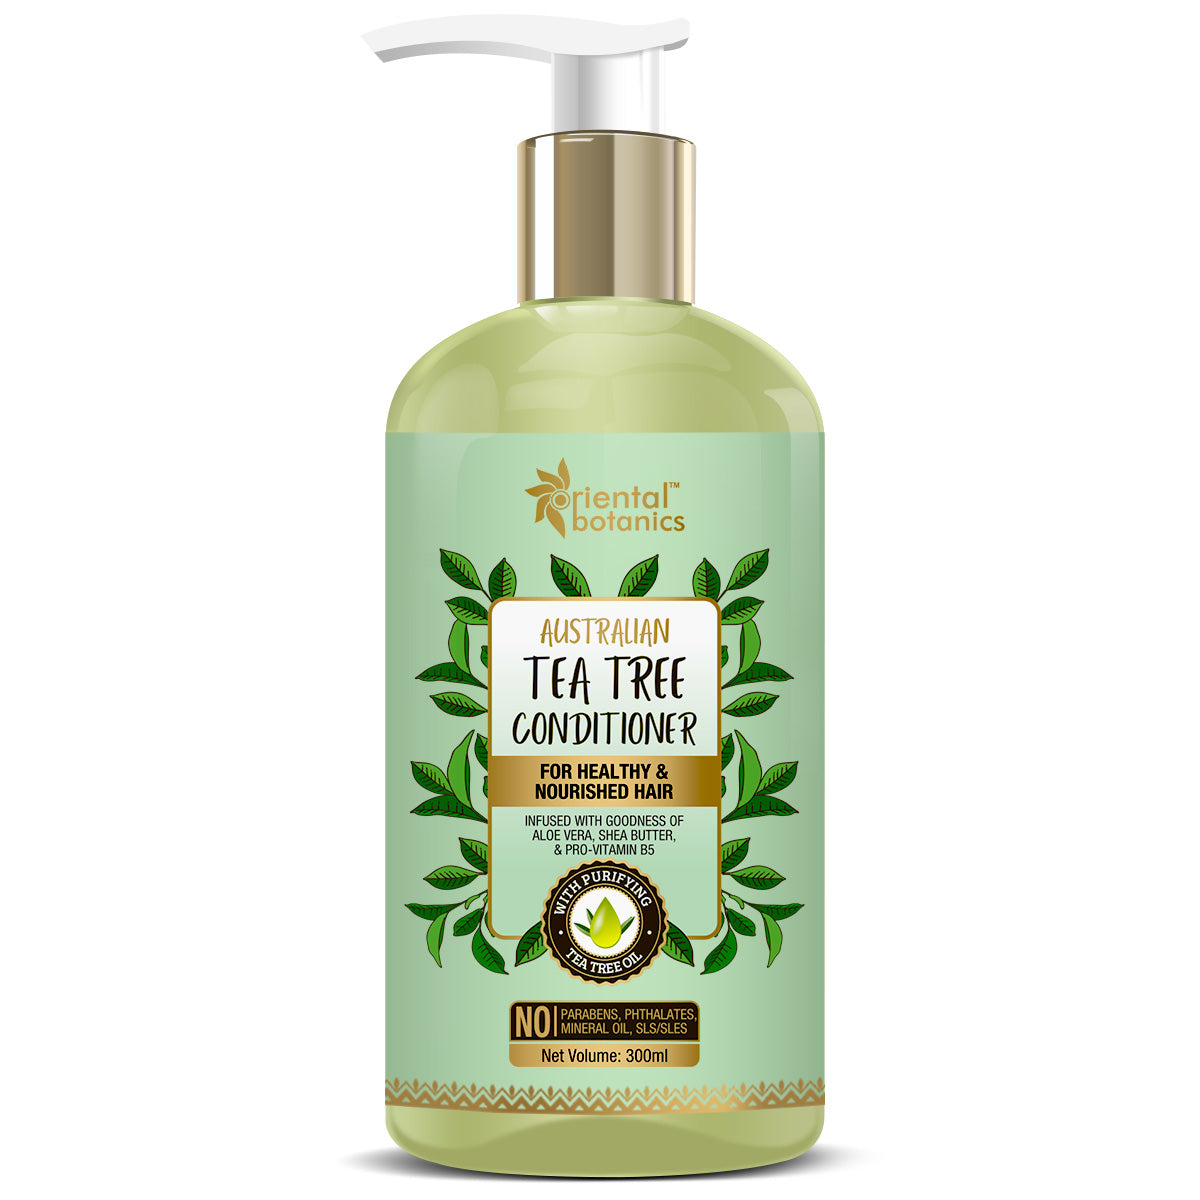 Oriental Botanics Australian Tea Tree Hair Conditioner - With Aloe Vera, Shea Butter - For Healthy And Nourished Hair - No SLS / Sulphate, Paraben, 300 ml